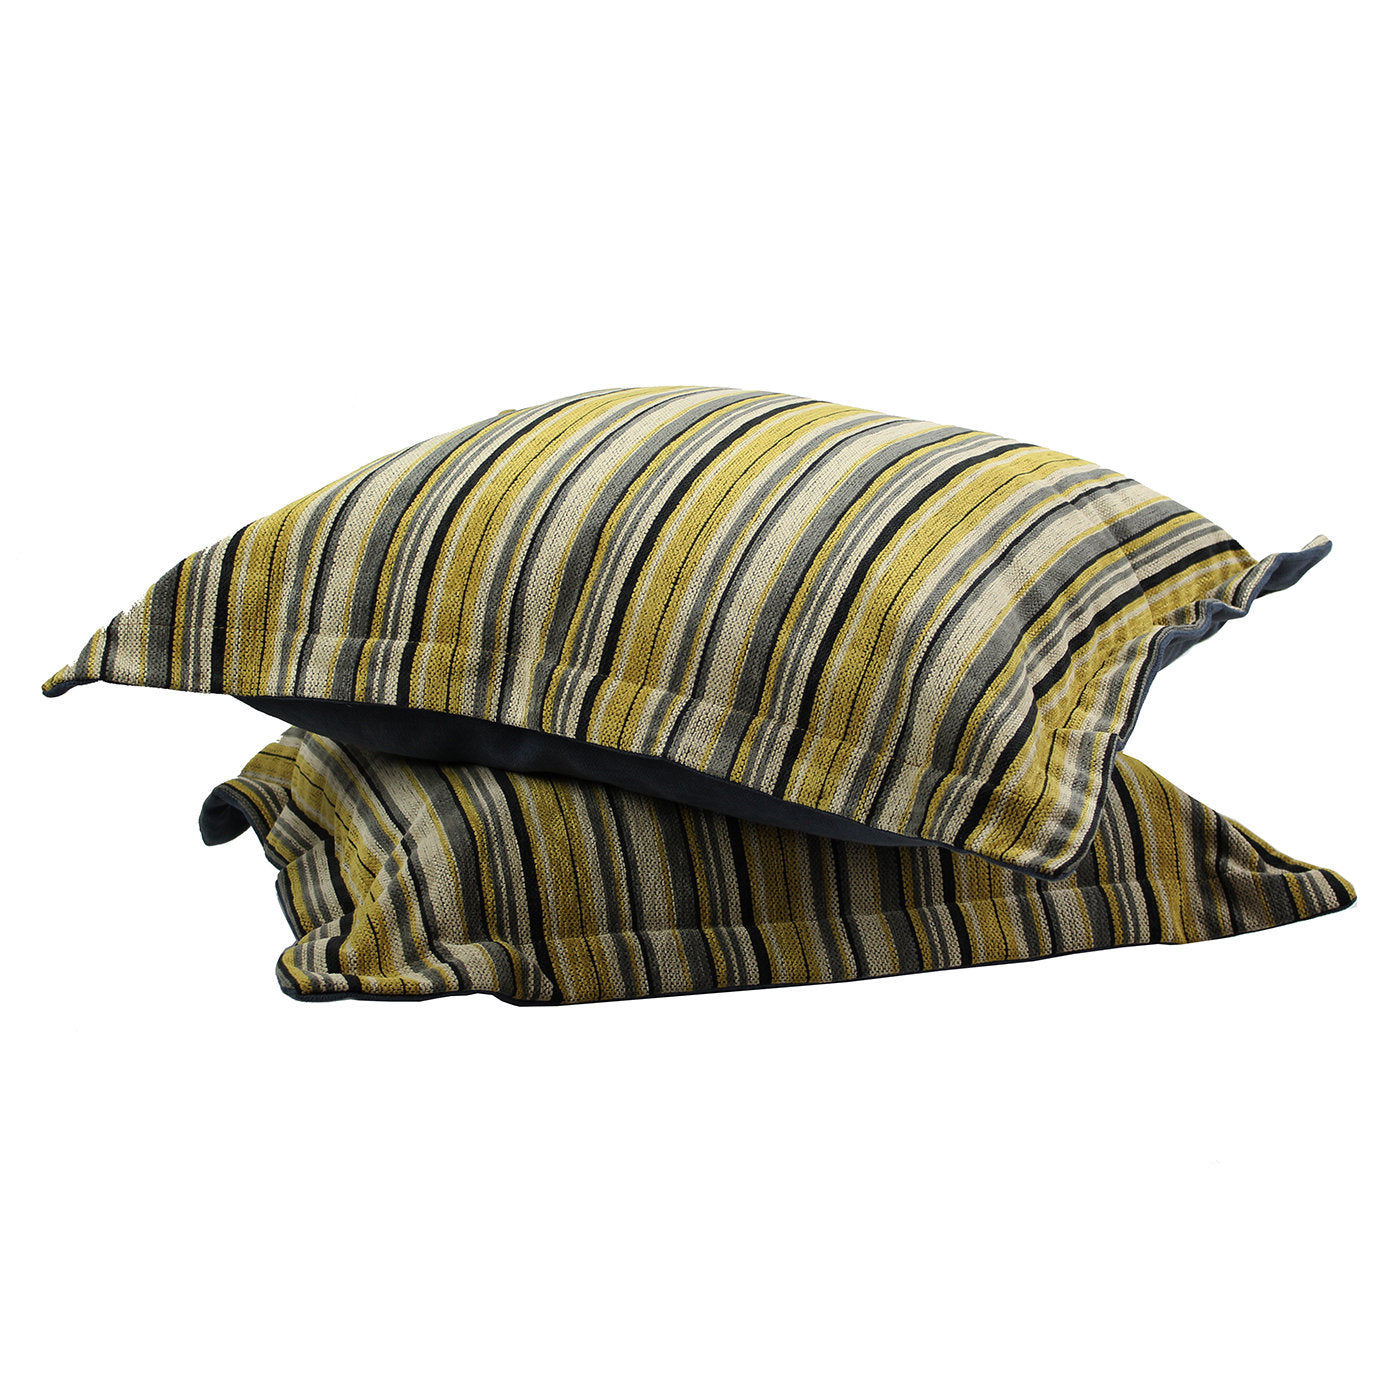 Set of 2 Over-Sized Mustard Lush Cushions  - Alternative view 1